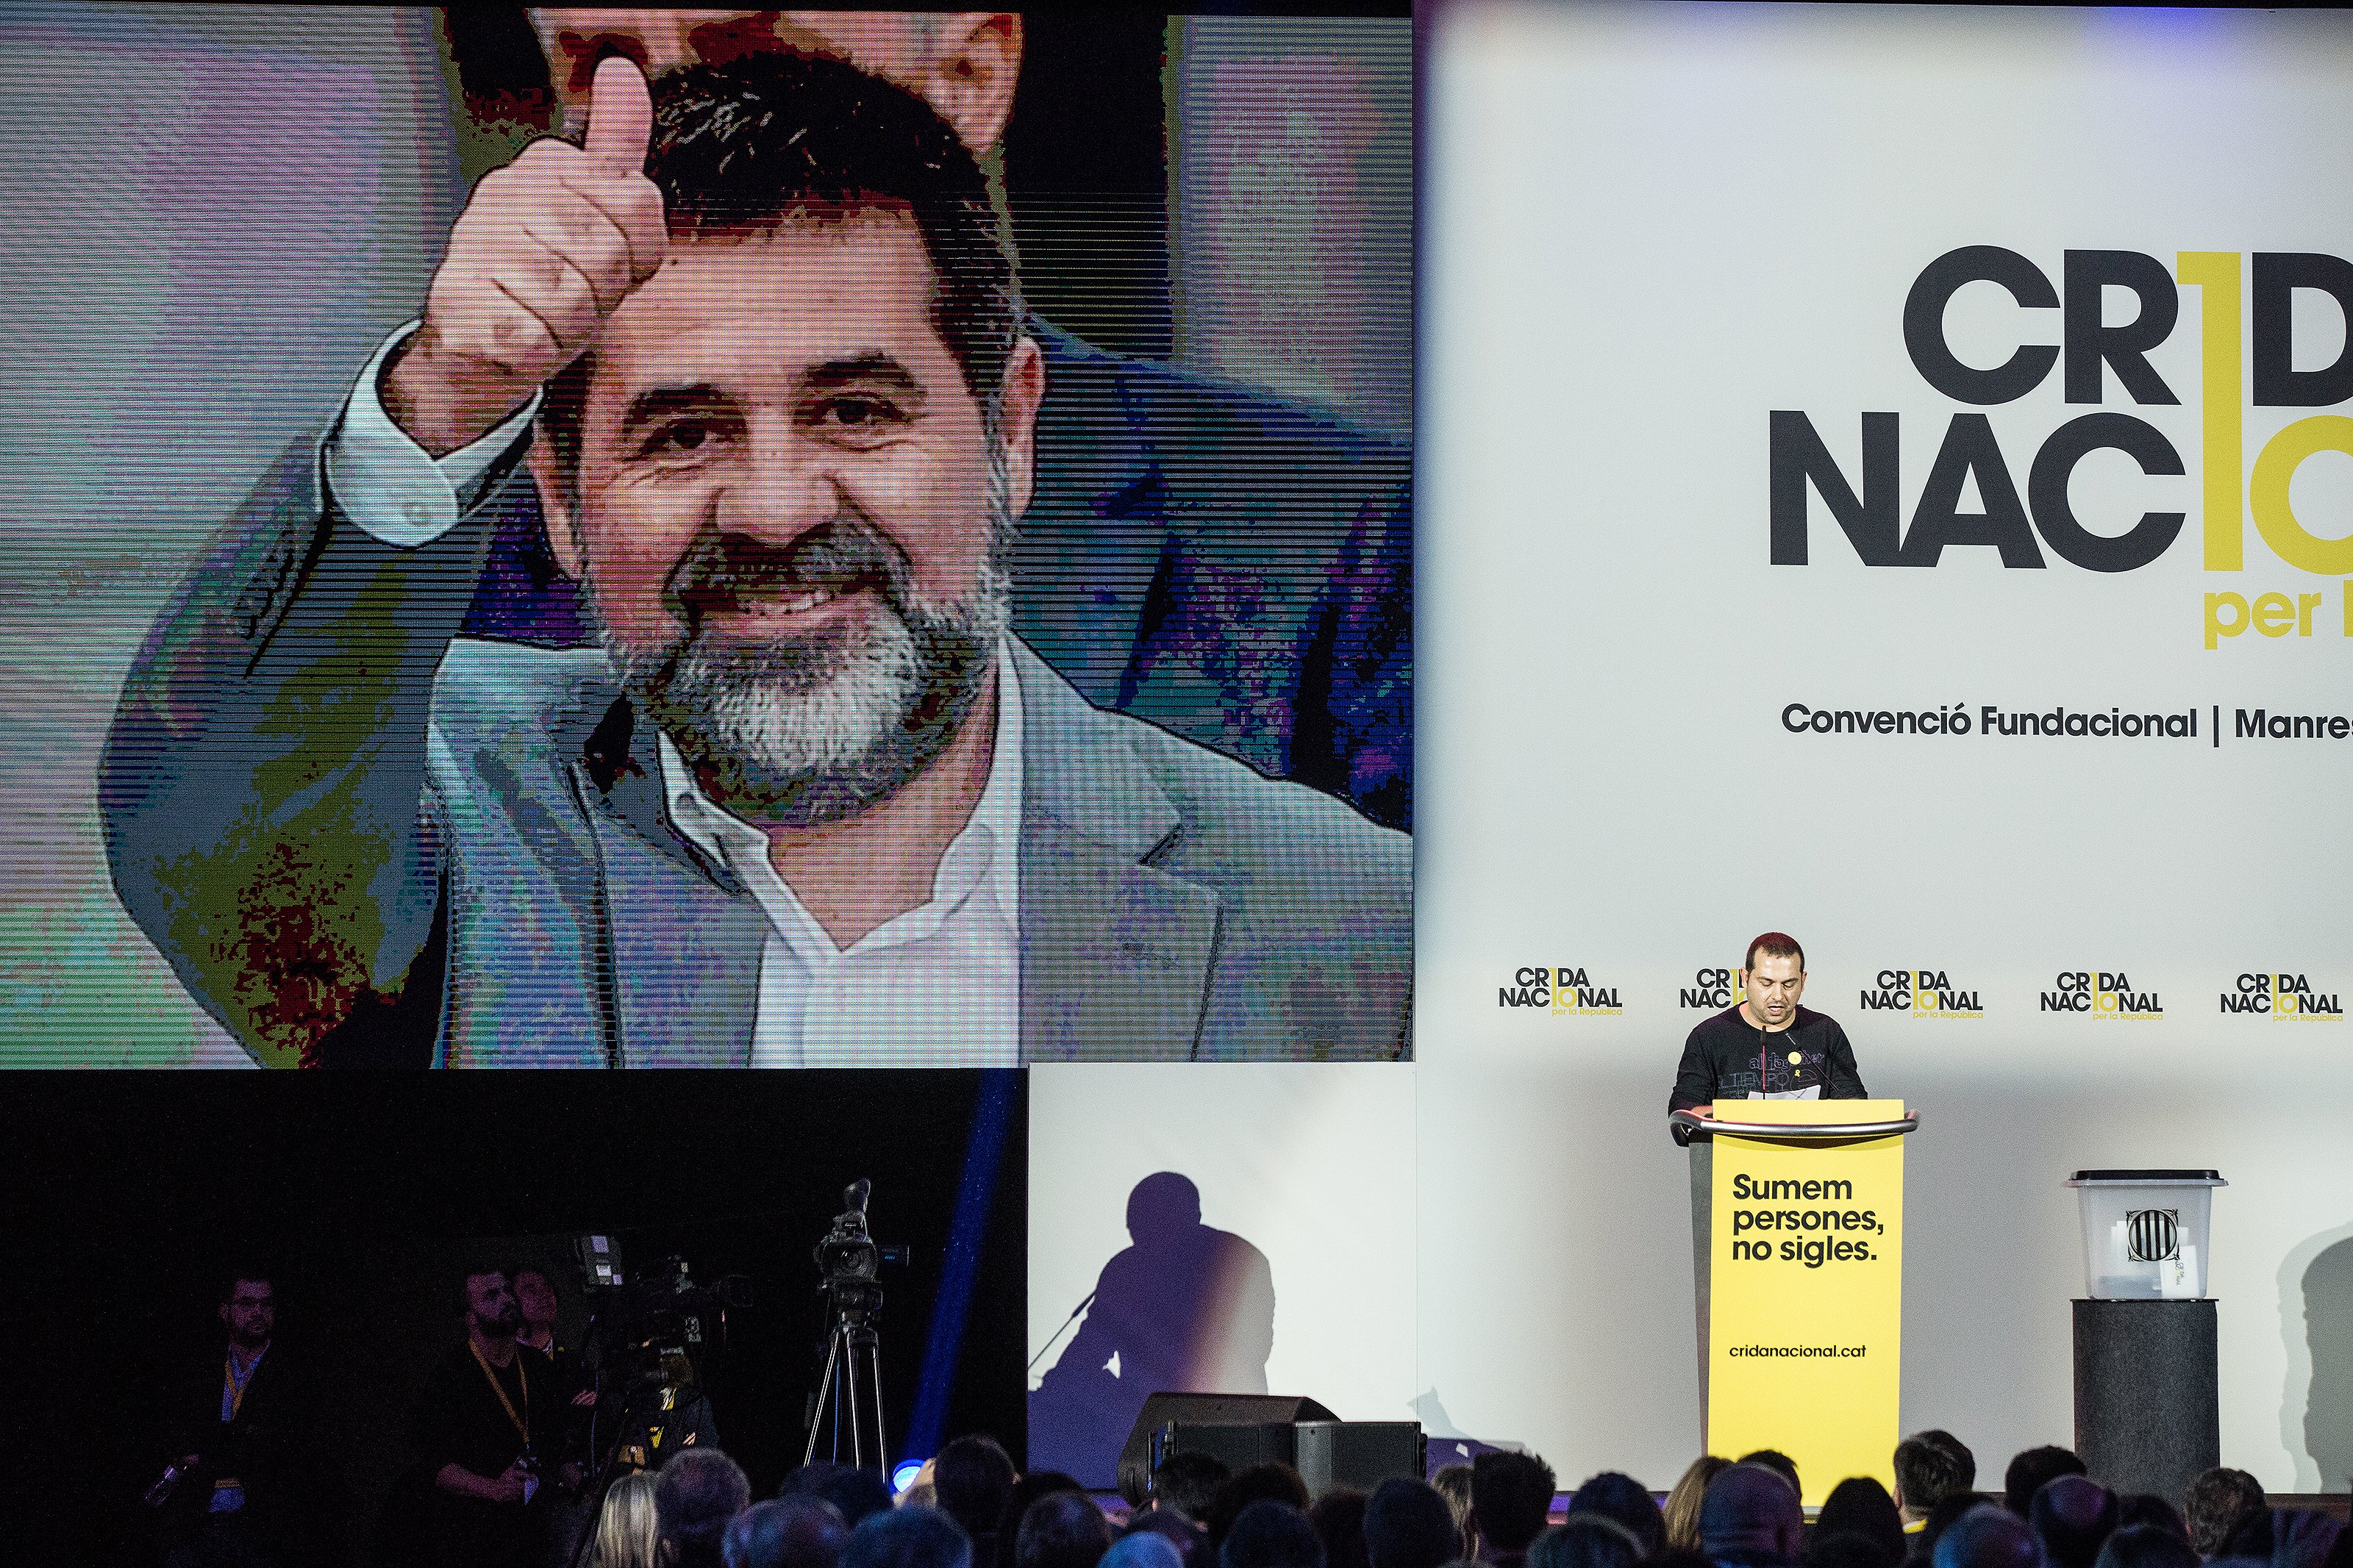 Jordi Sànchez: jailed, on trial - and backed as a candidate for Spain's Congress